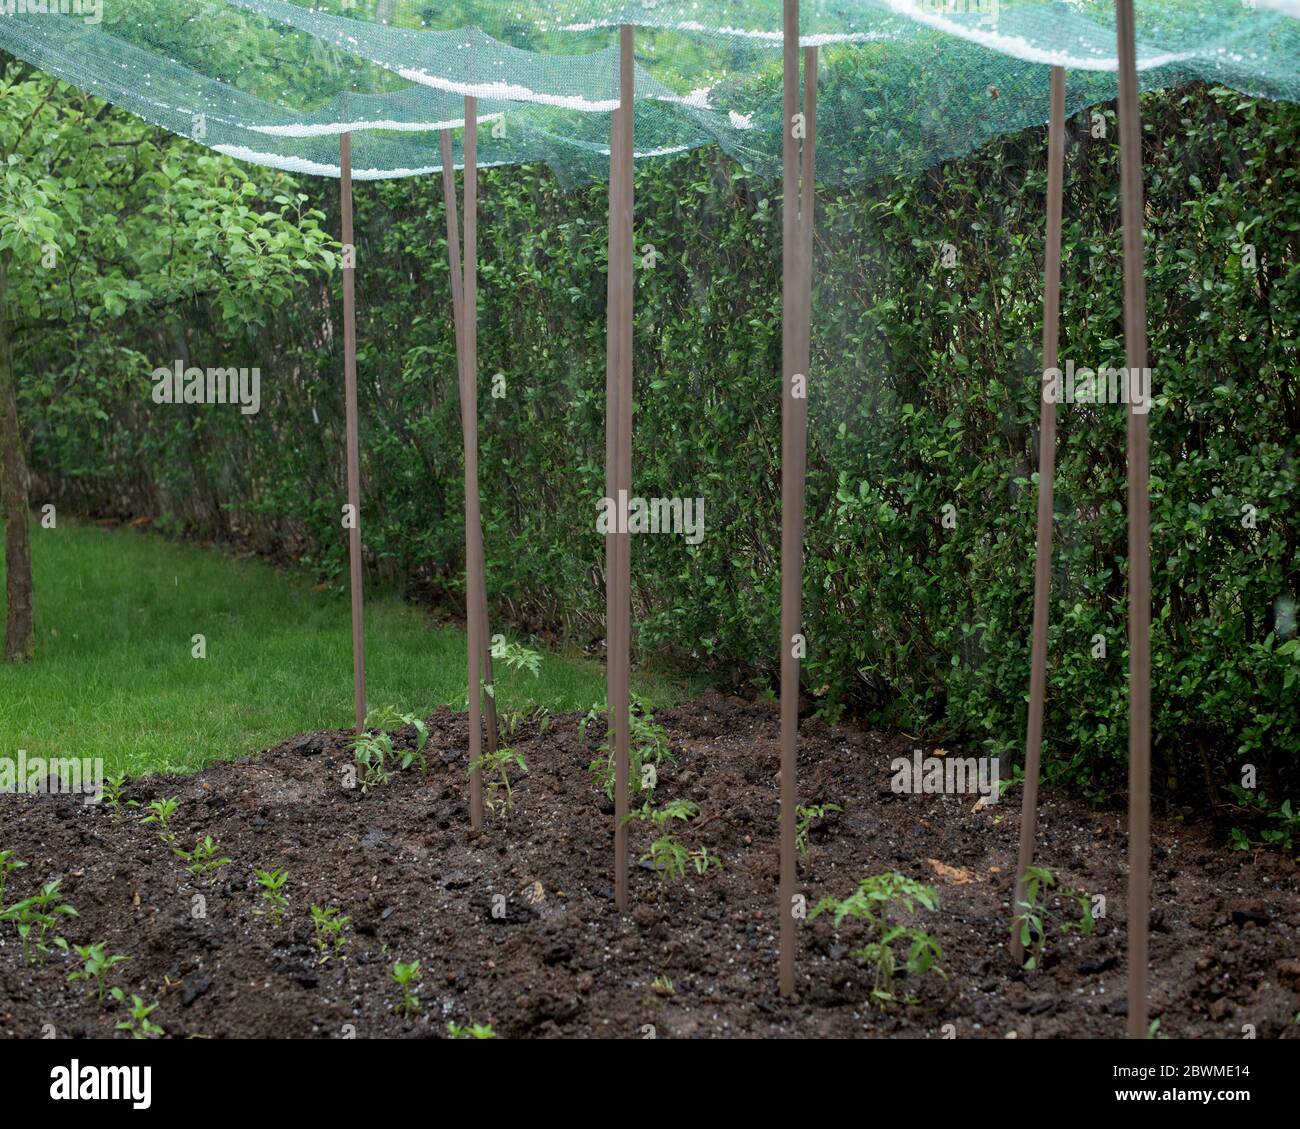 Hailstone in a protective net over vegetable plants - tomato and pepper- in a garden Stock Photo